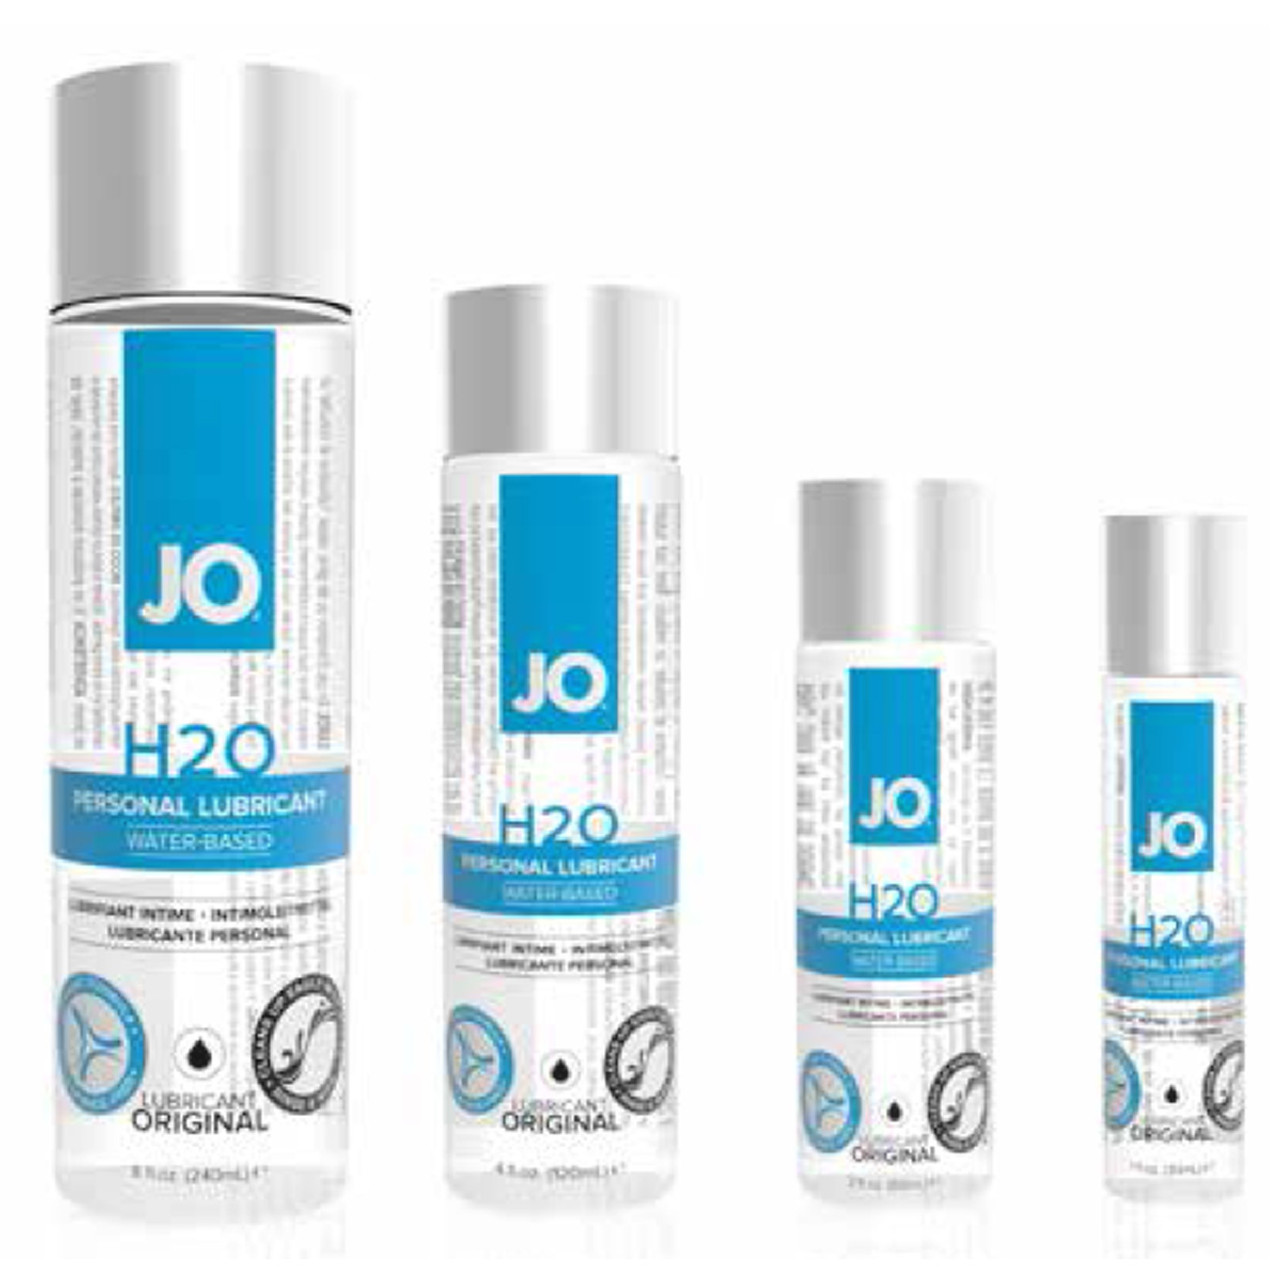 H2O - Our Clean and Simple Water-Based Lubricant